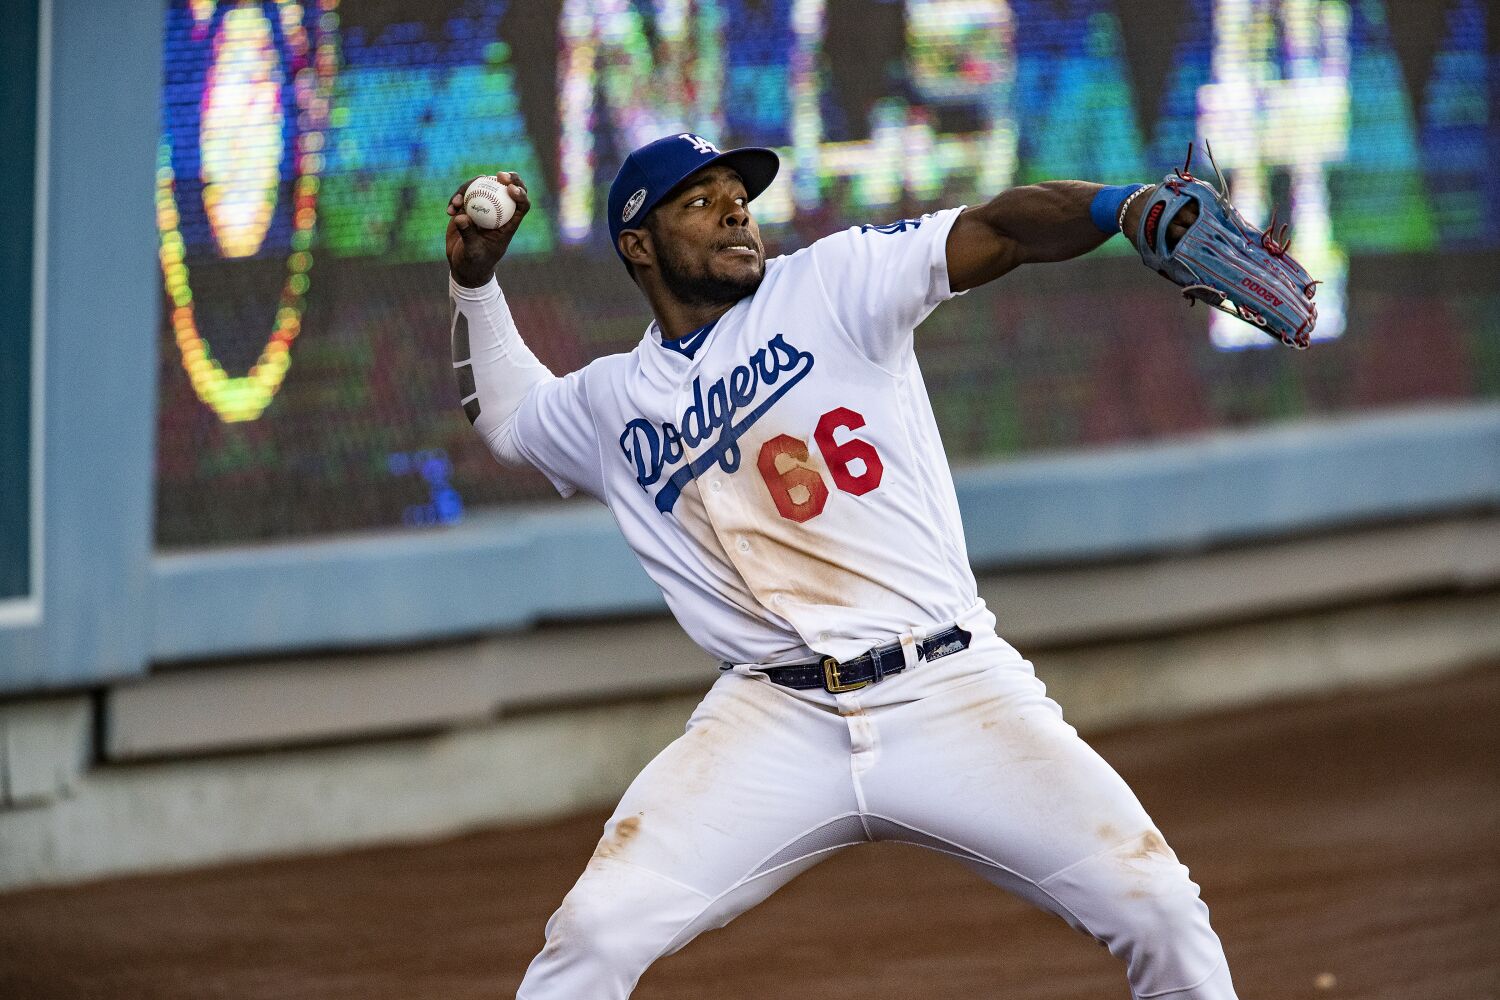 Former Dodgers star Yasiel Puig now says he is not guilty in sports betting case